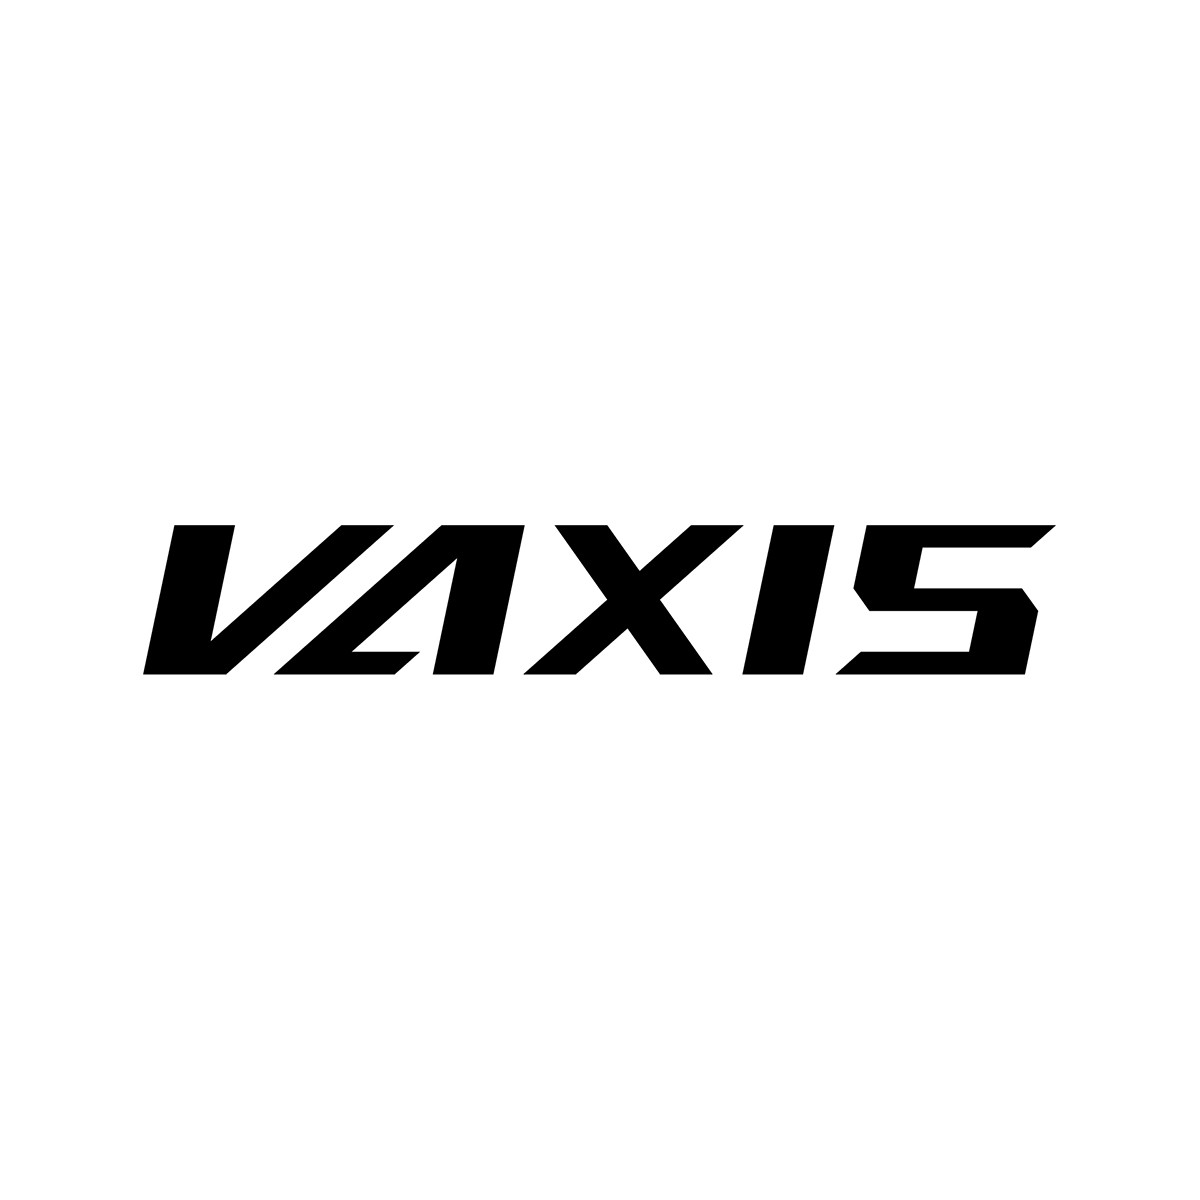 Vaxis